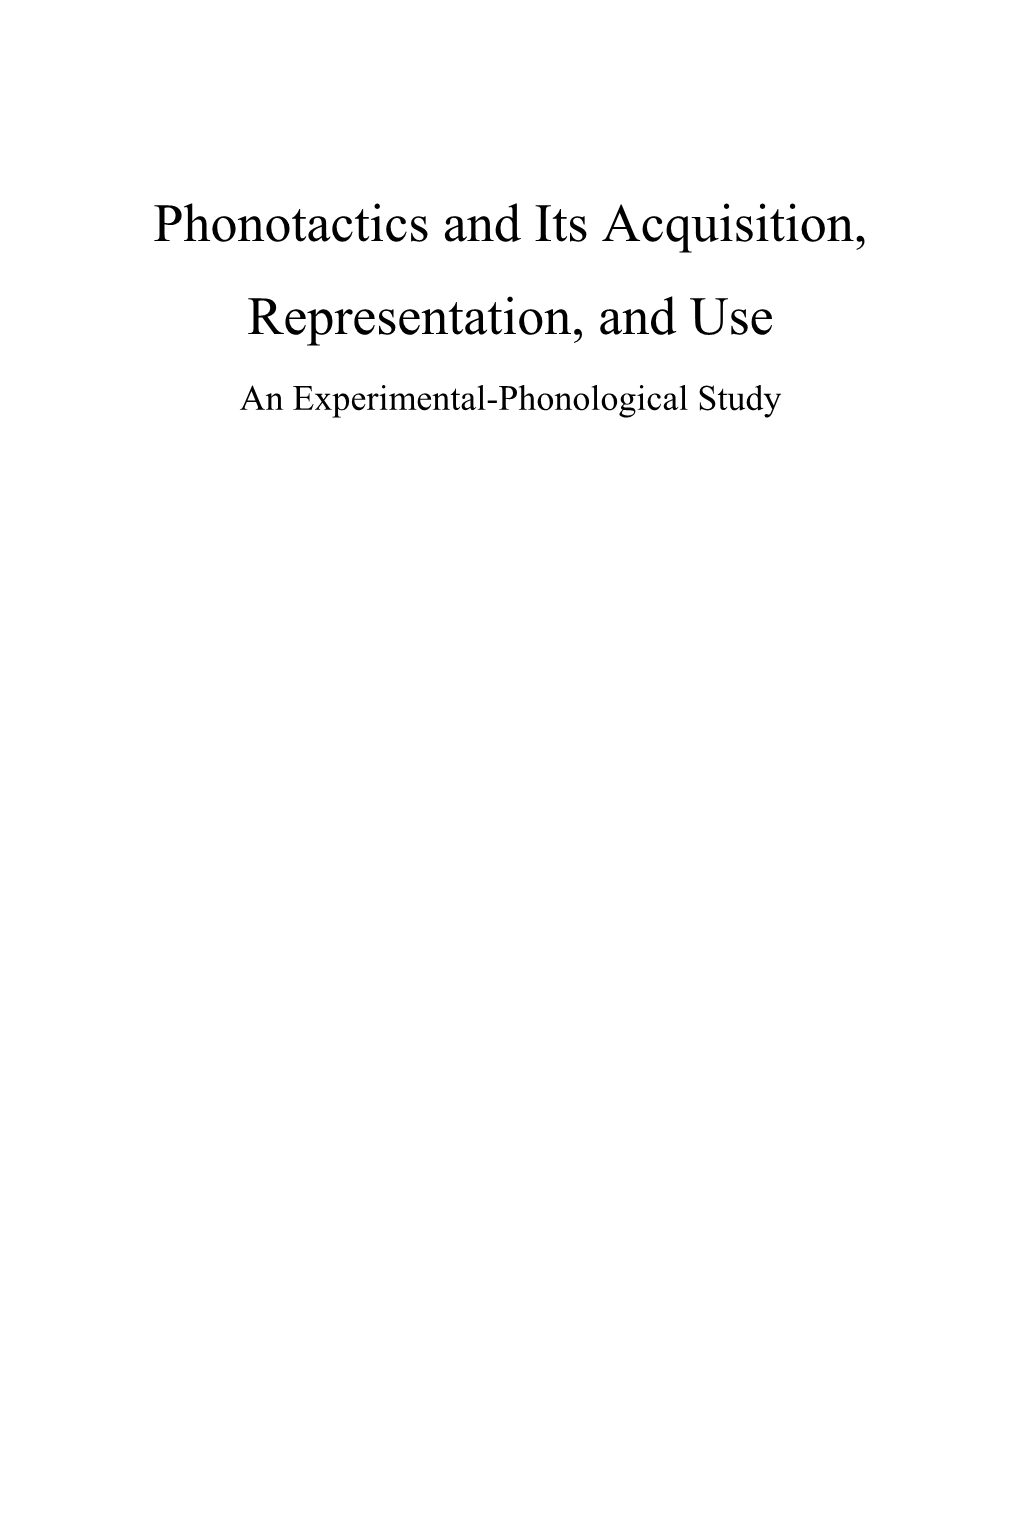 Phonotactics and Its Acquisition, Representation, and Use